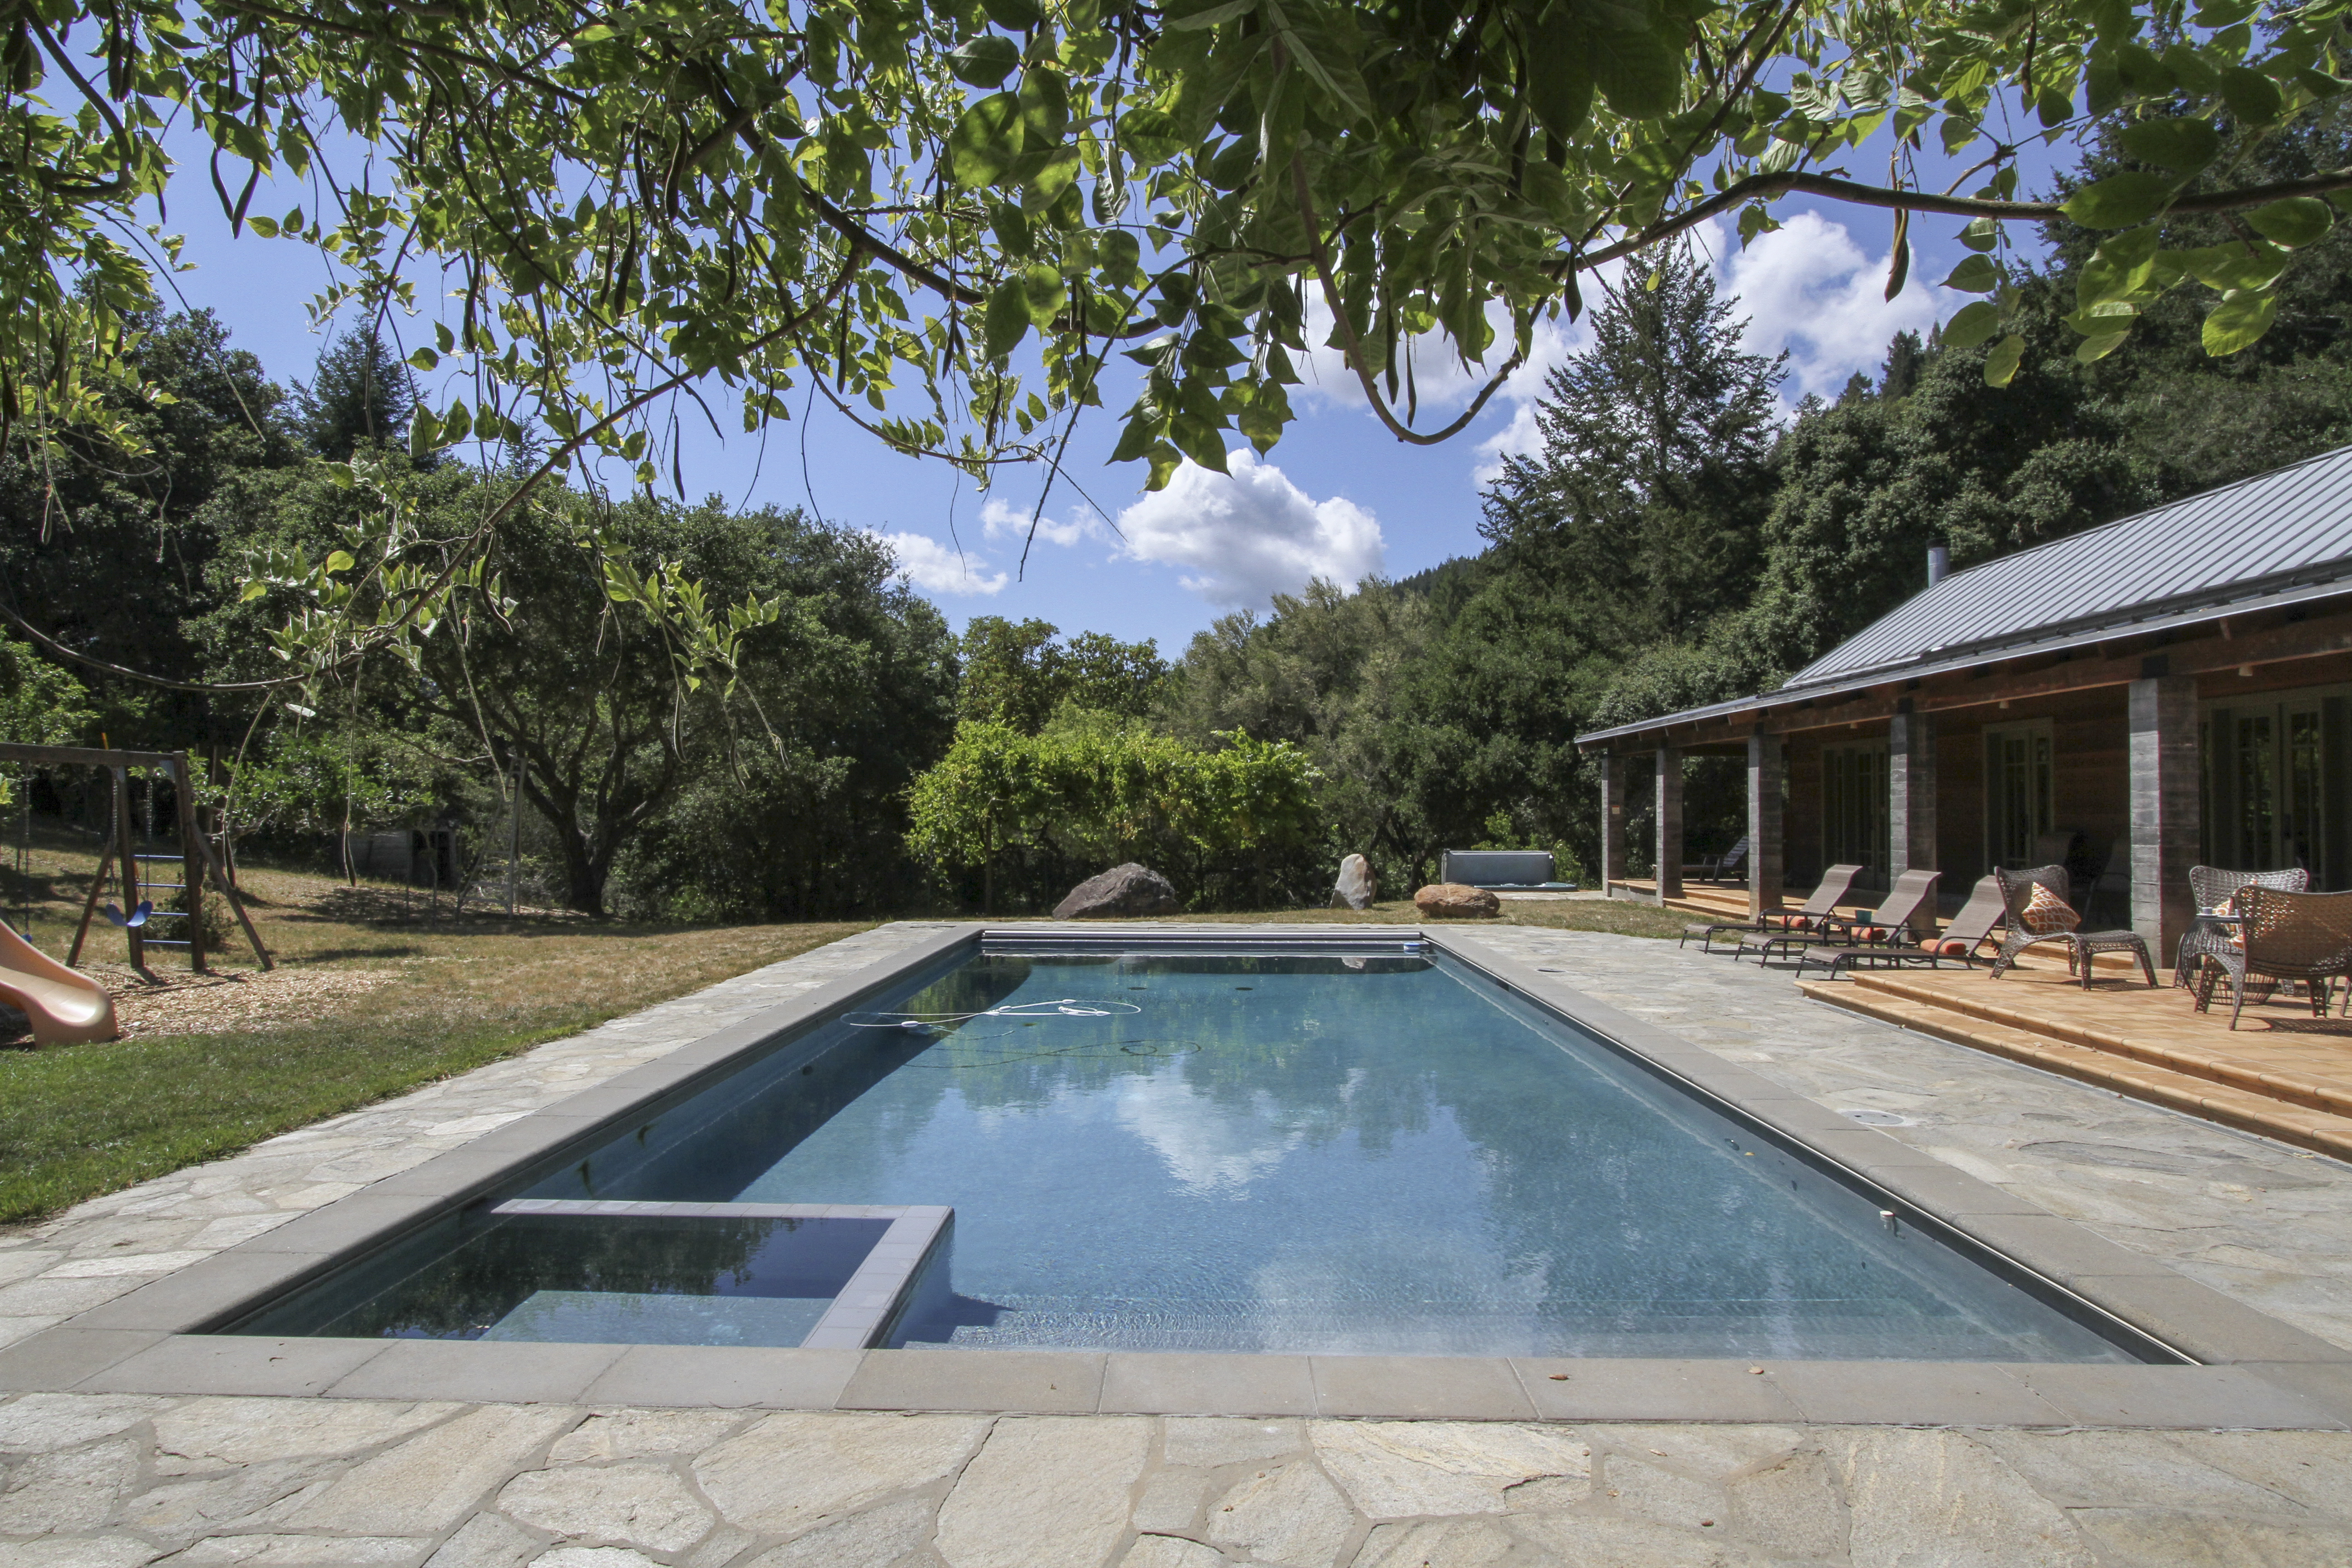 Black Mountain's pool - private ideal setting